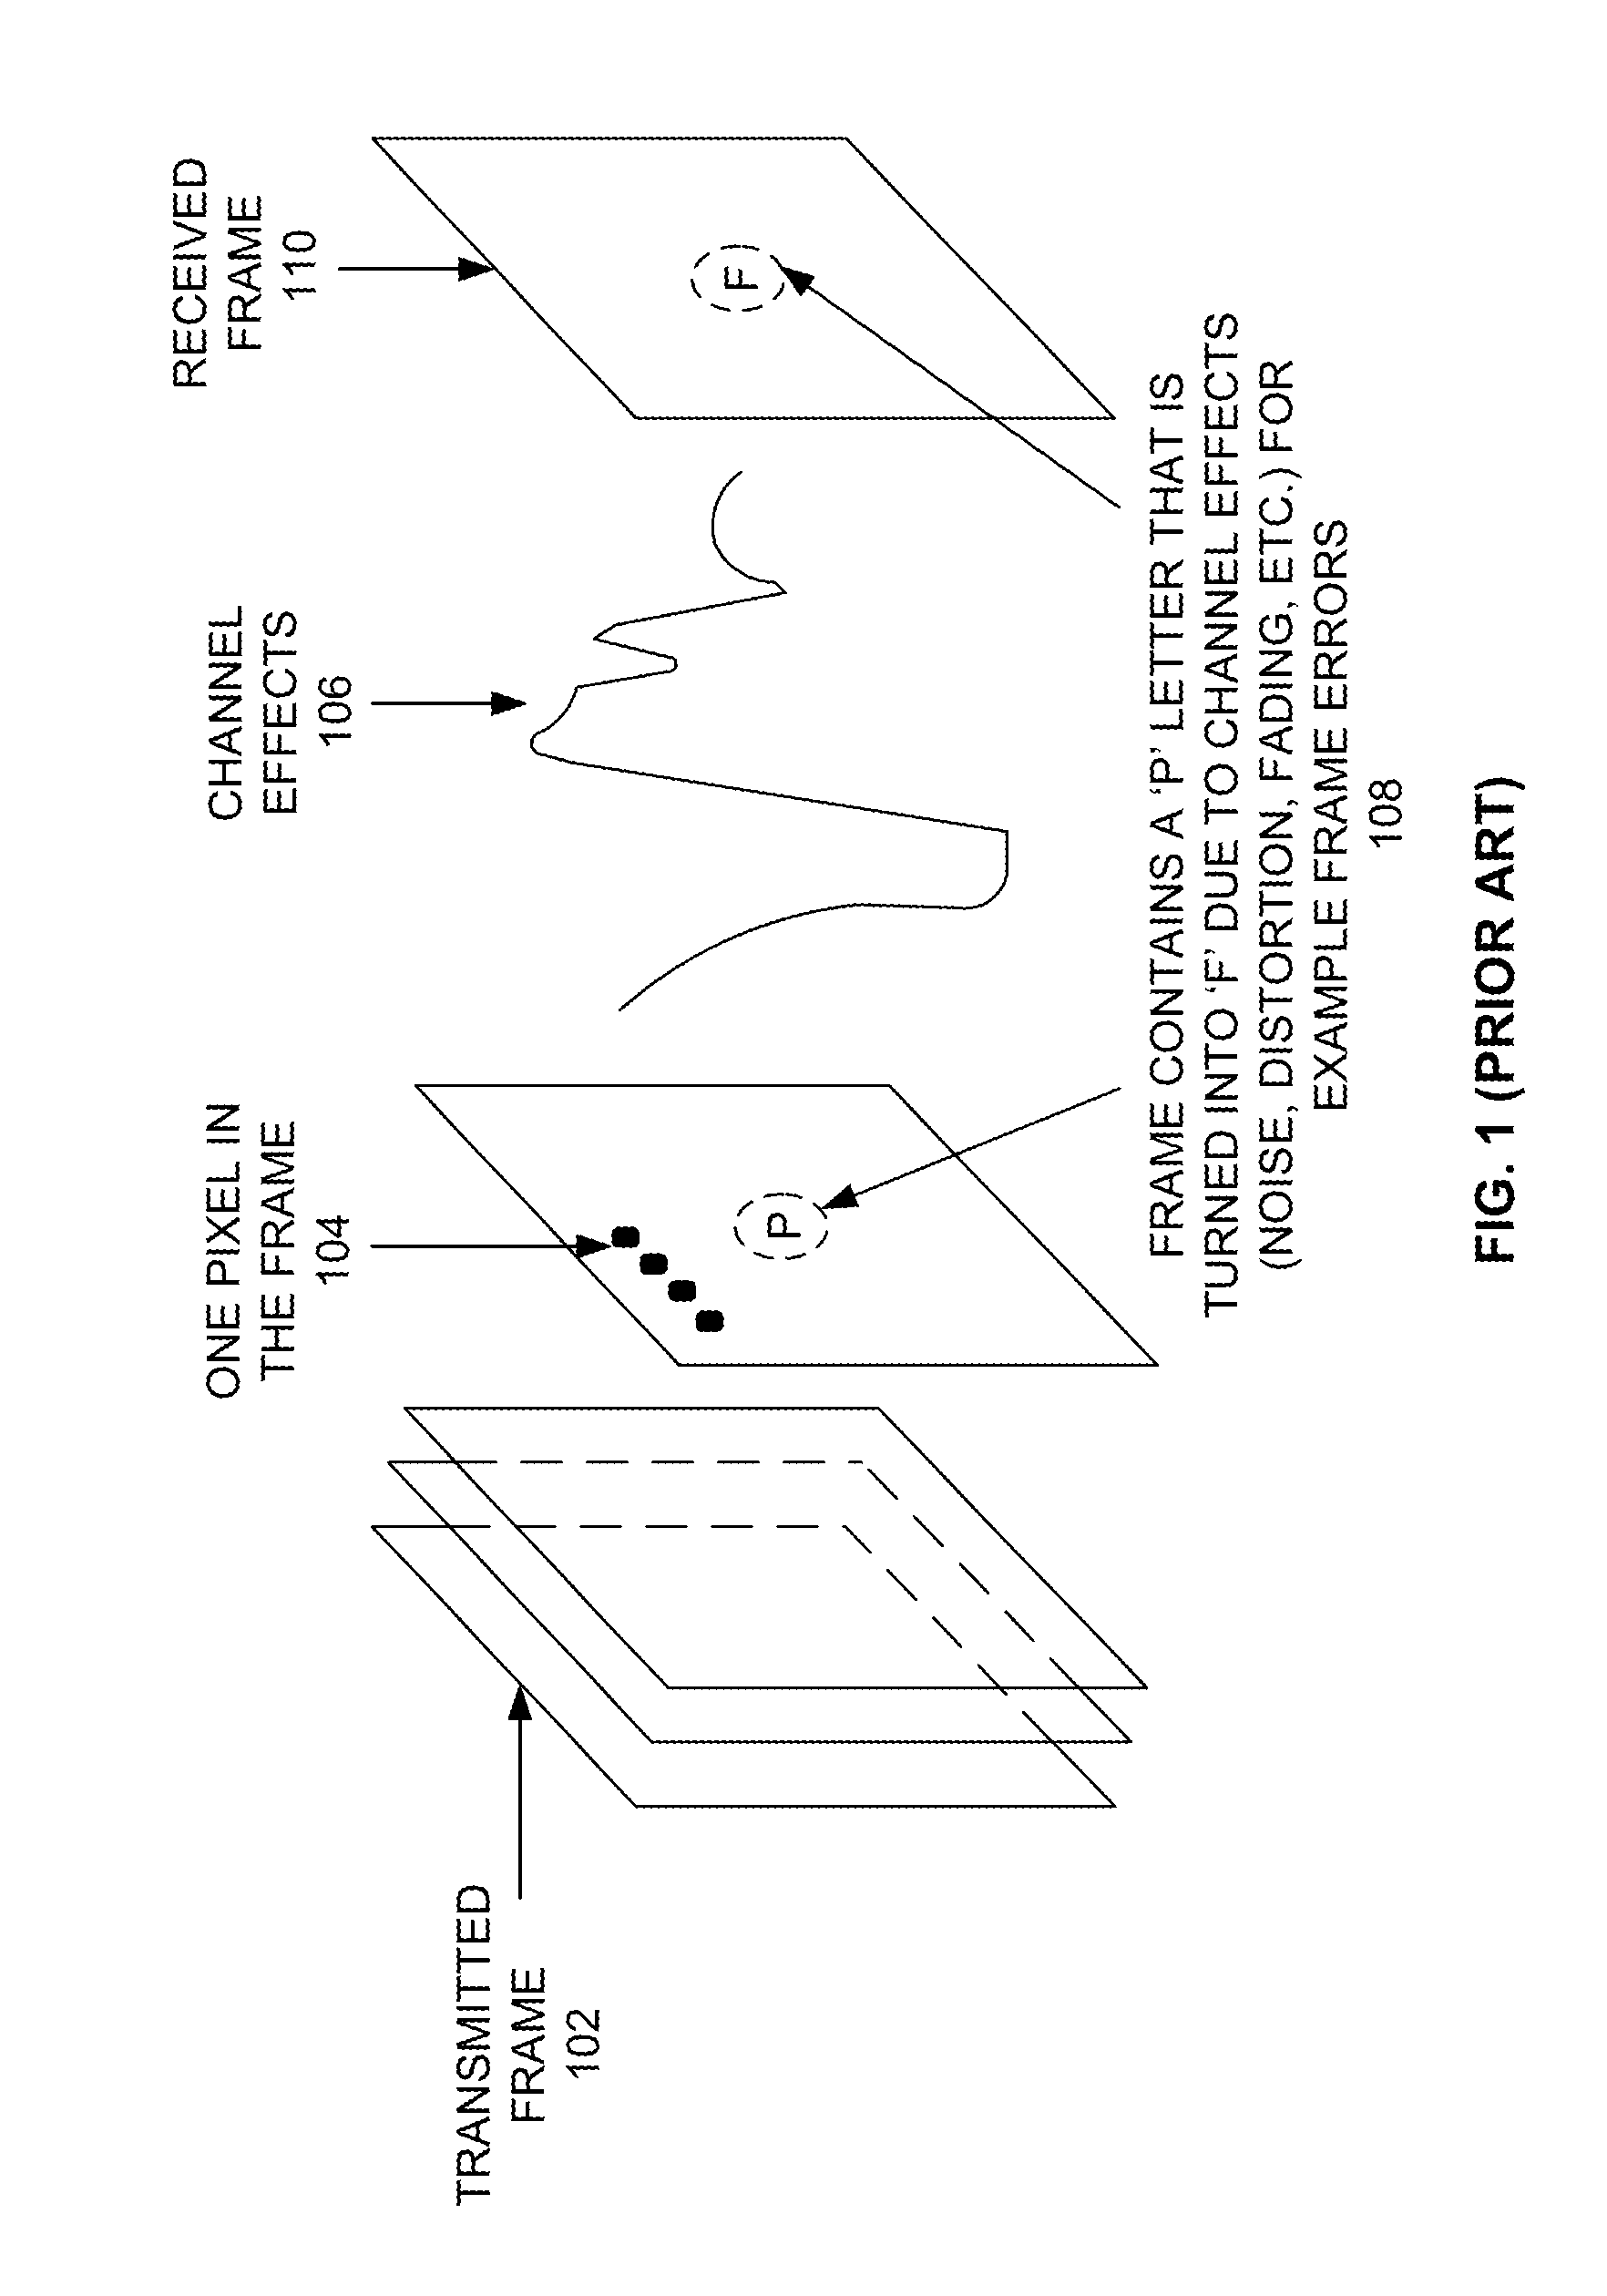 Buffer size reduction for wireless analog TV receivers